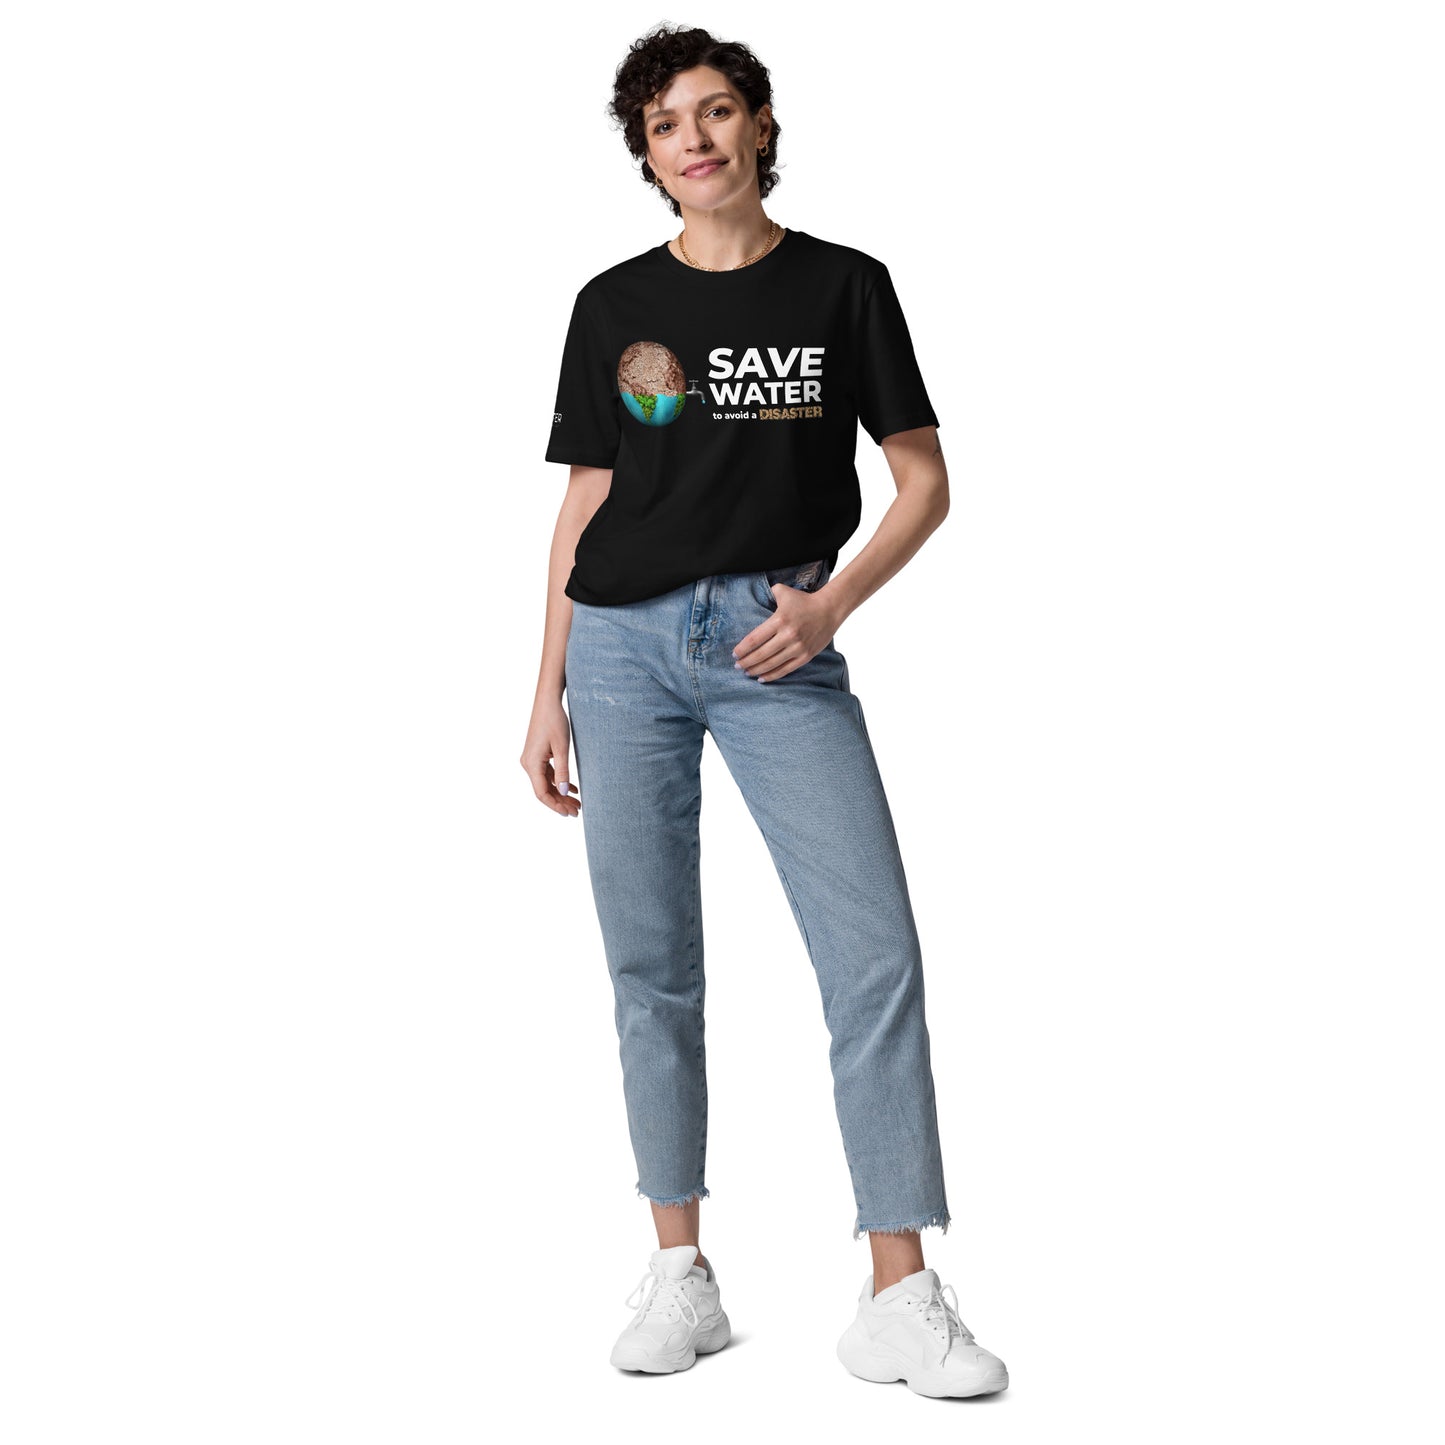 T Shirt Organic Cotton Unisex - Save Water To avoid a Disaster